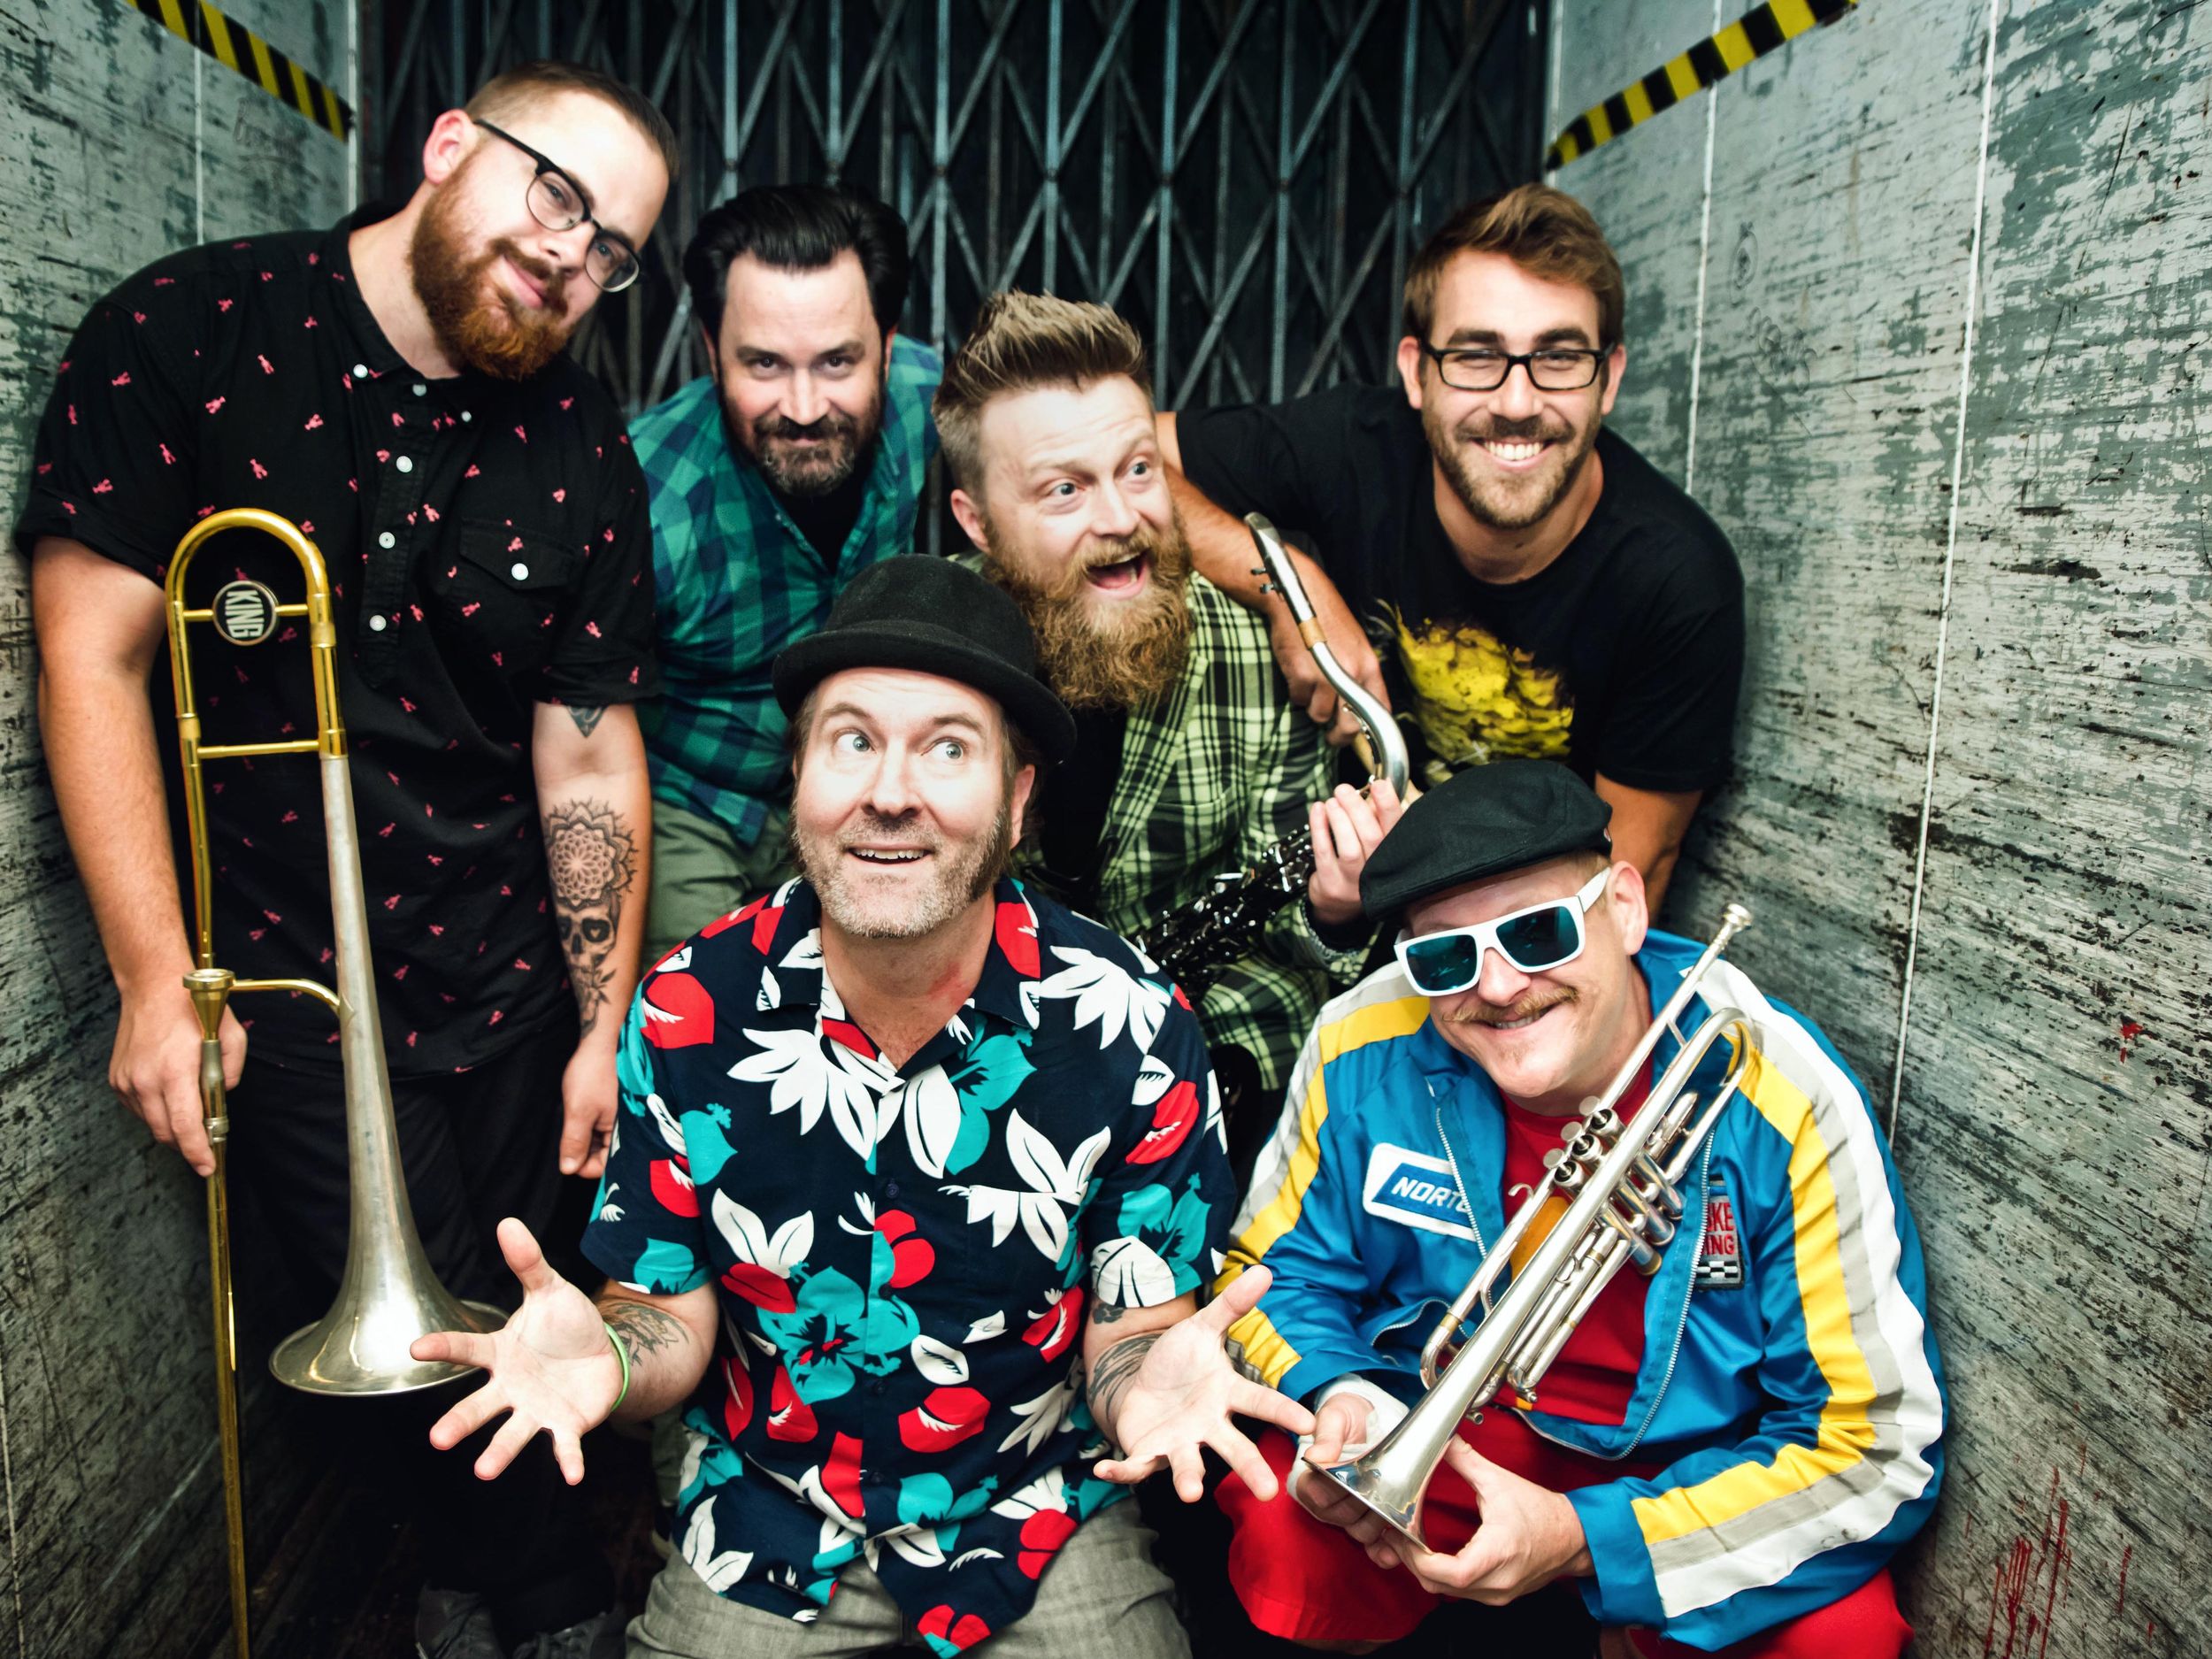 Reel Big Fish band leader Aaron Barrett brings new, upbeat tunes to the  Knitting Factory